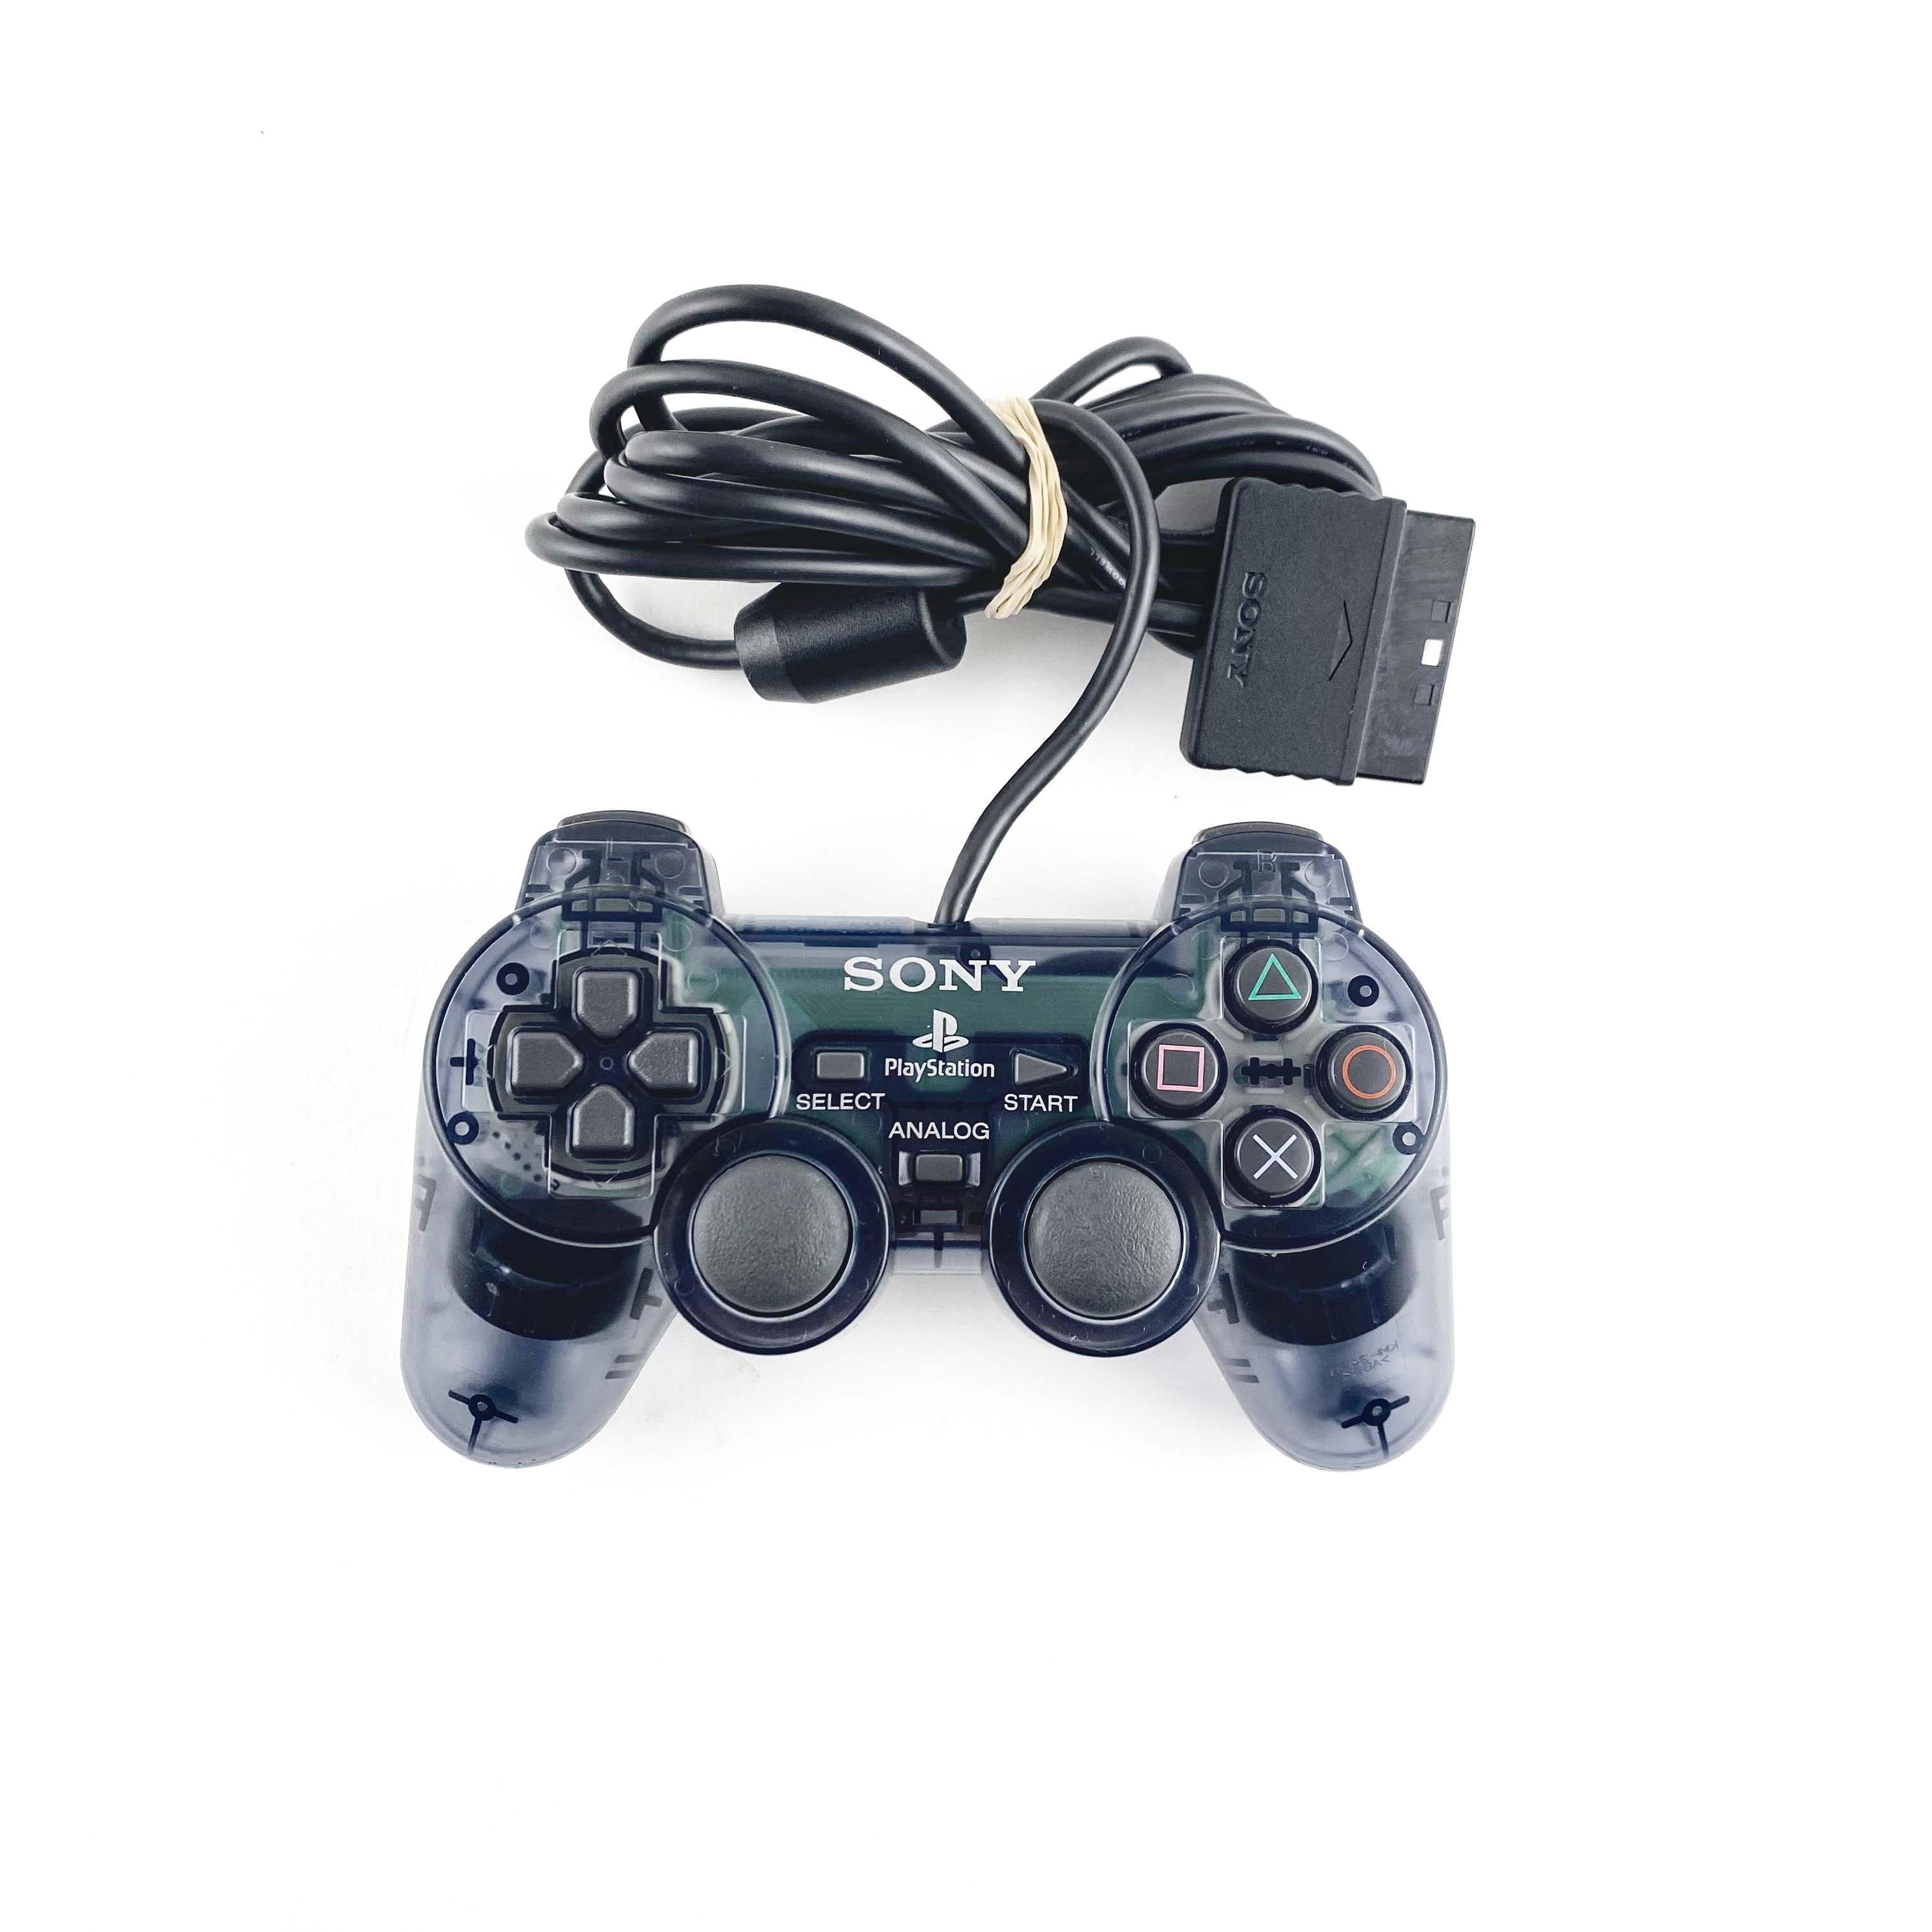 Sony PlayStation 2 PS2 DualShock 2 Clear Smoke Grey Controller (SCPH-10010)